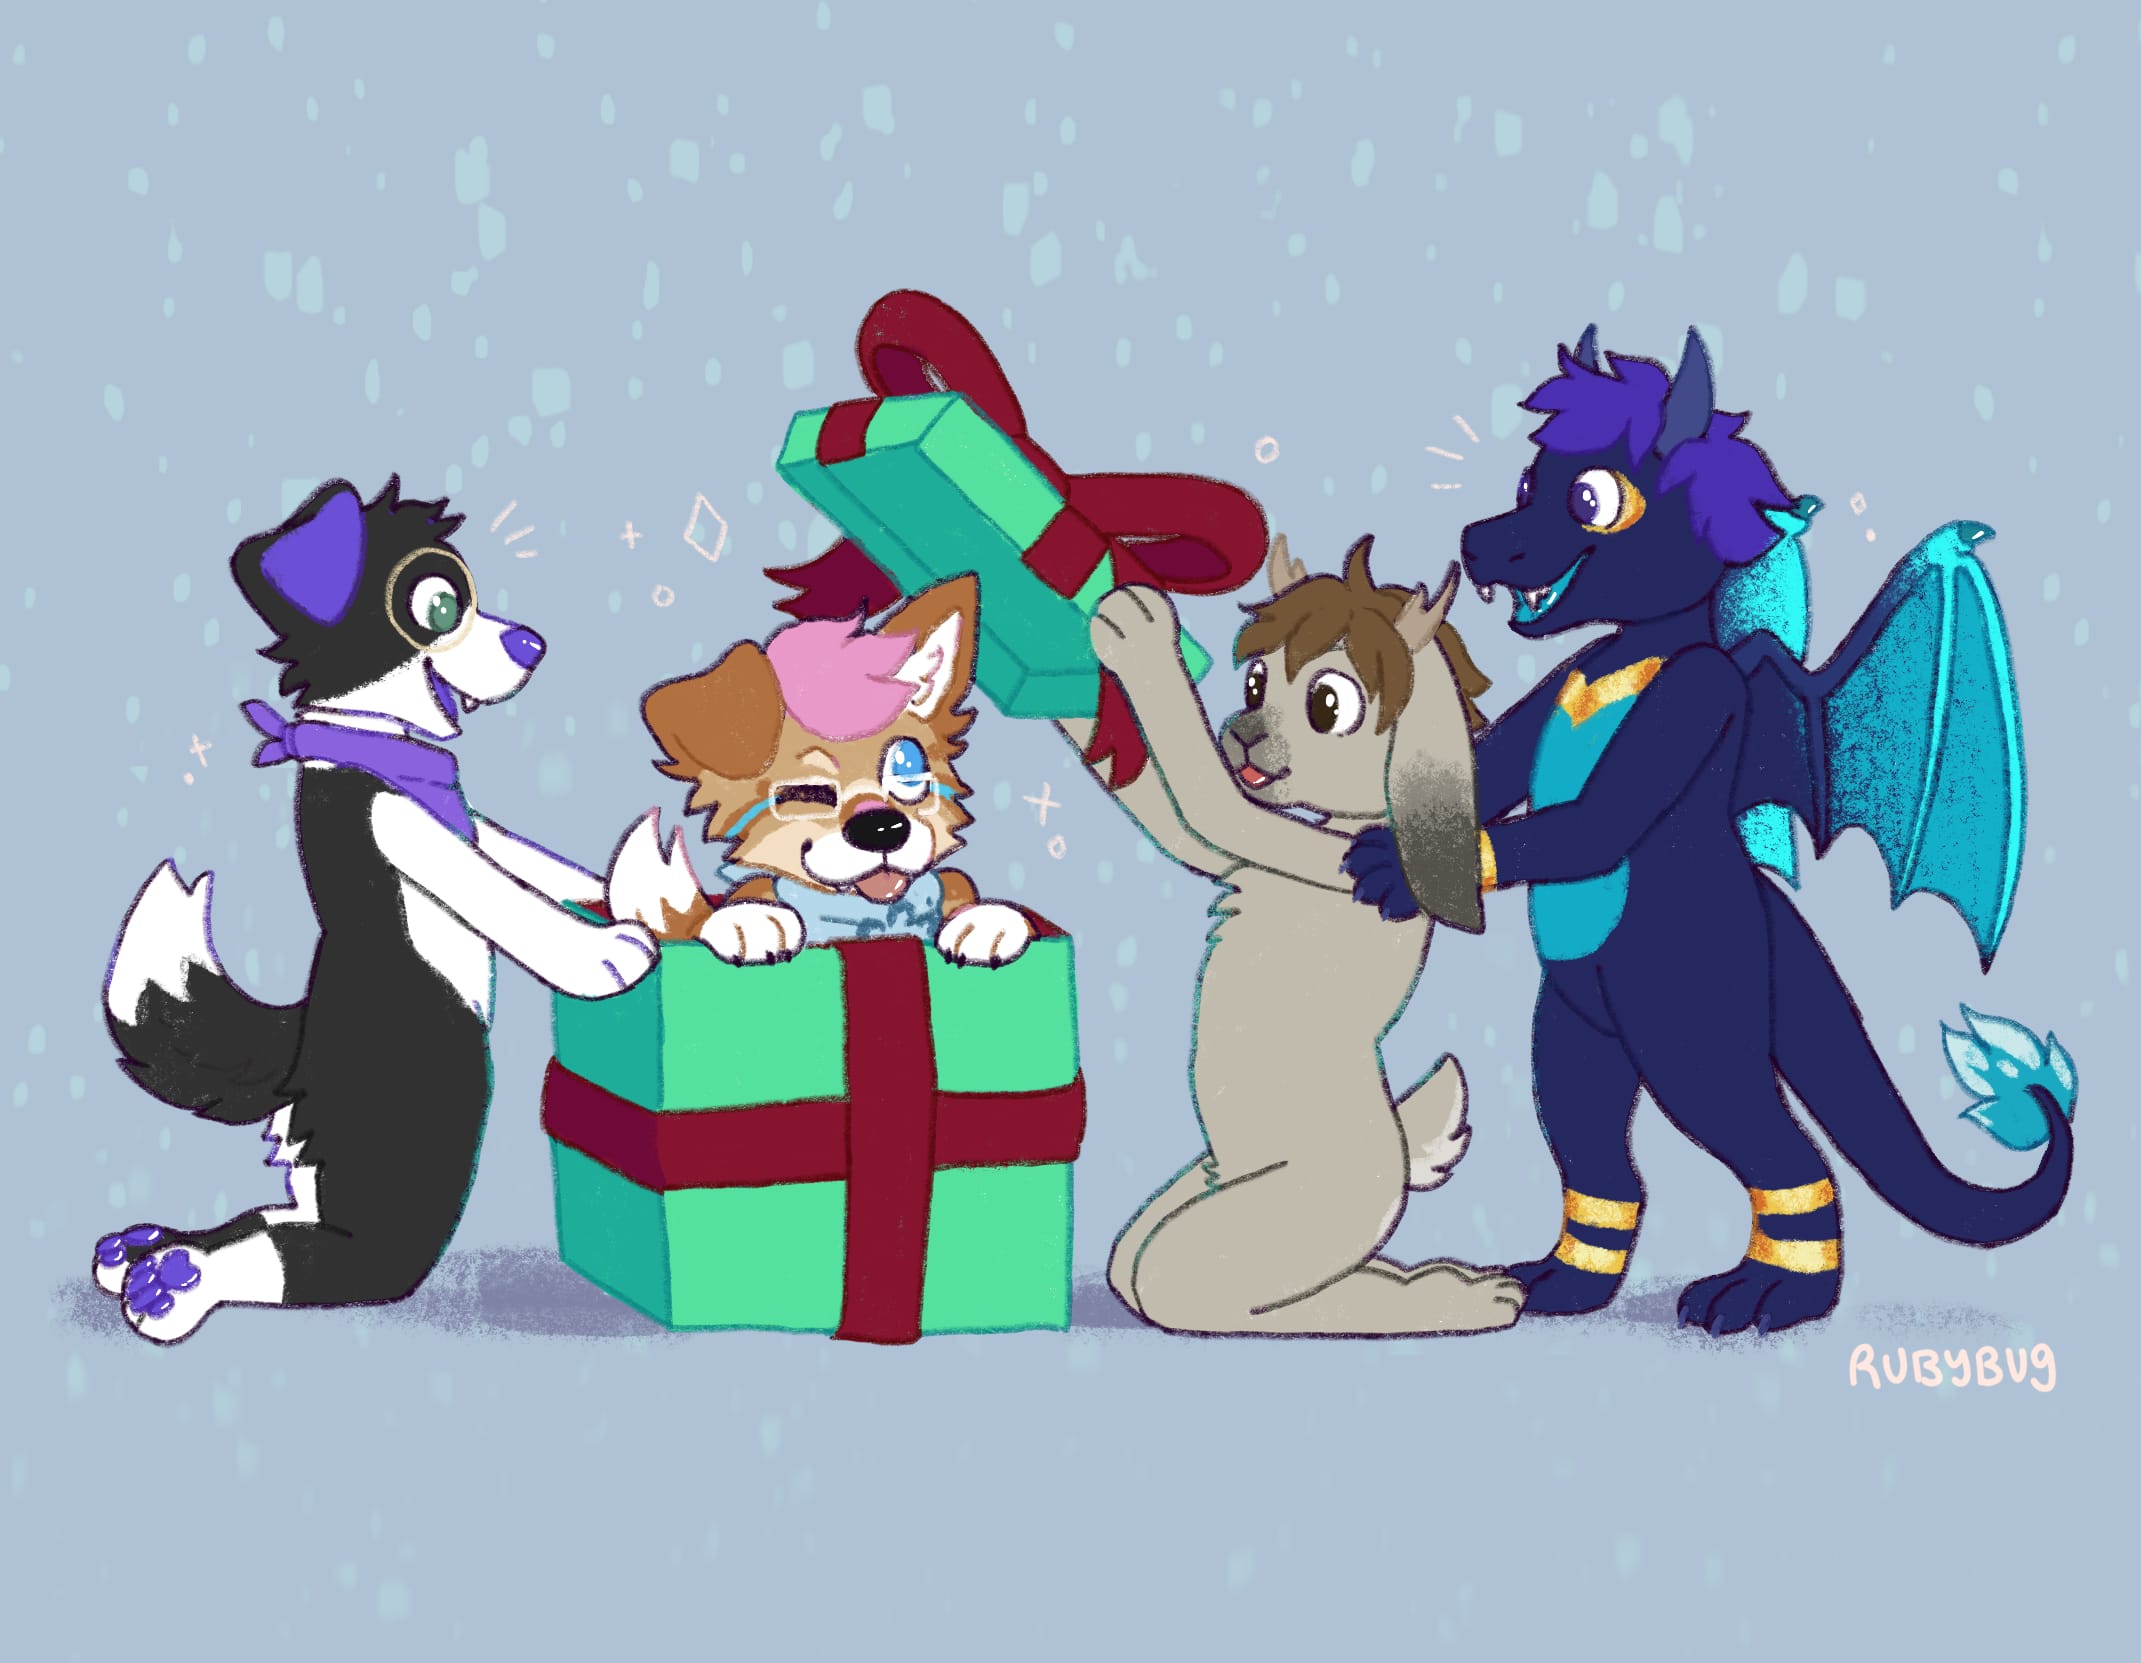 a drawing of Bowie as a puppy in a gift box with Devvy the border collie on the left, Shooshy the jackalope opening the box, and Styxx the dragon behind them. All are smiling!